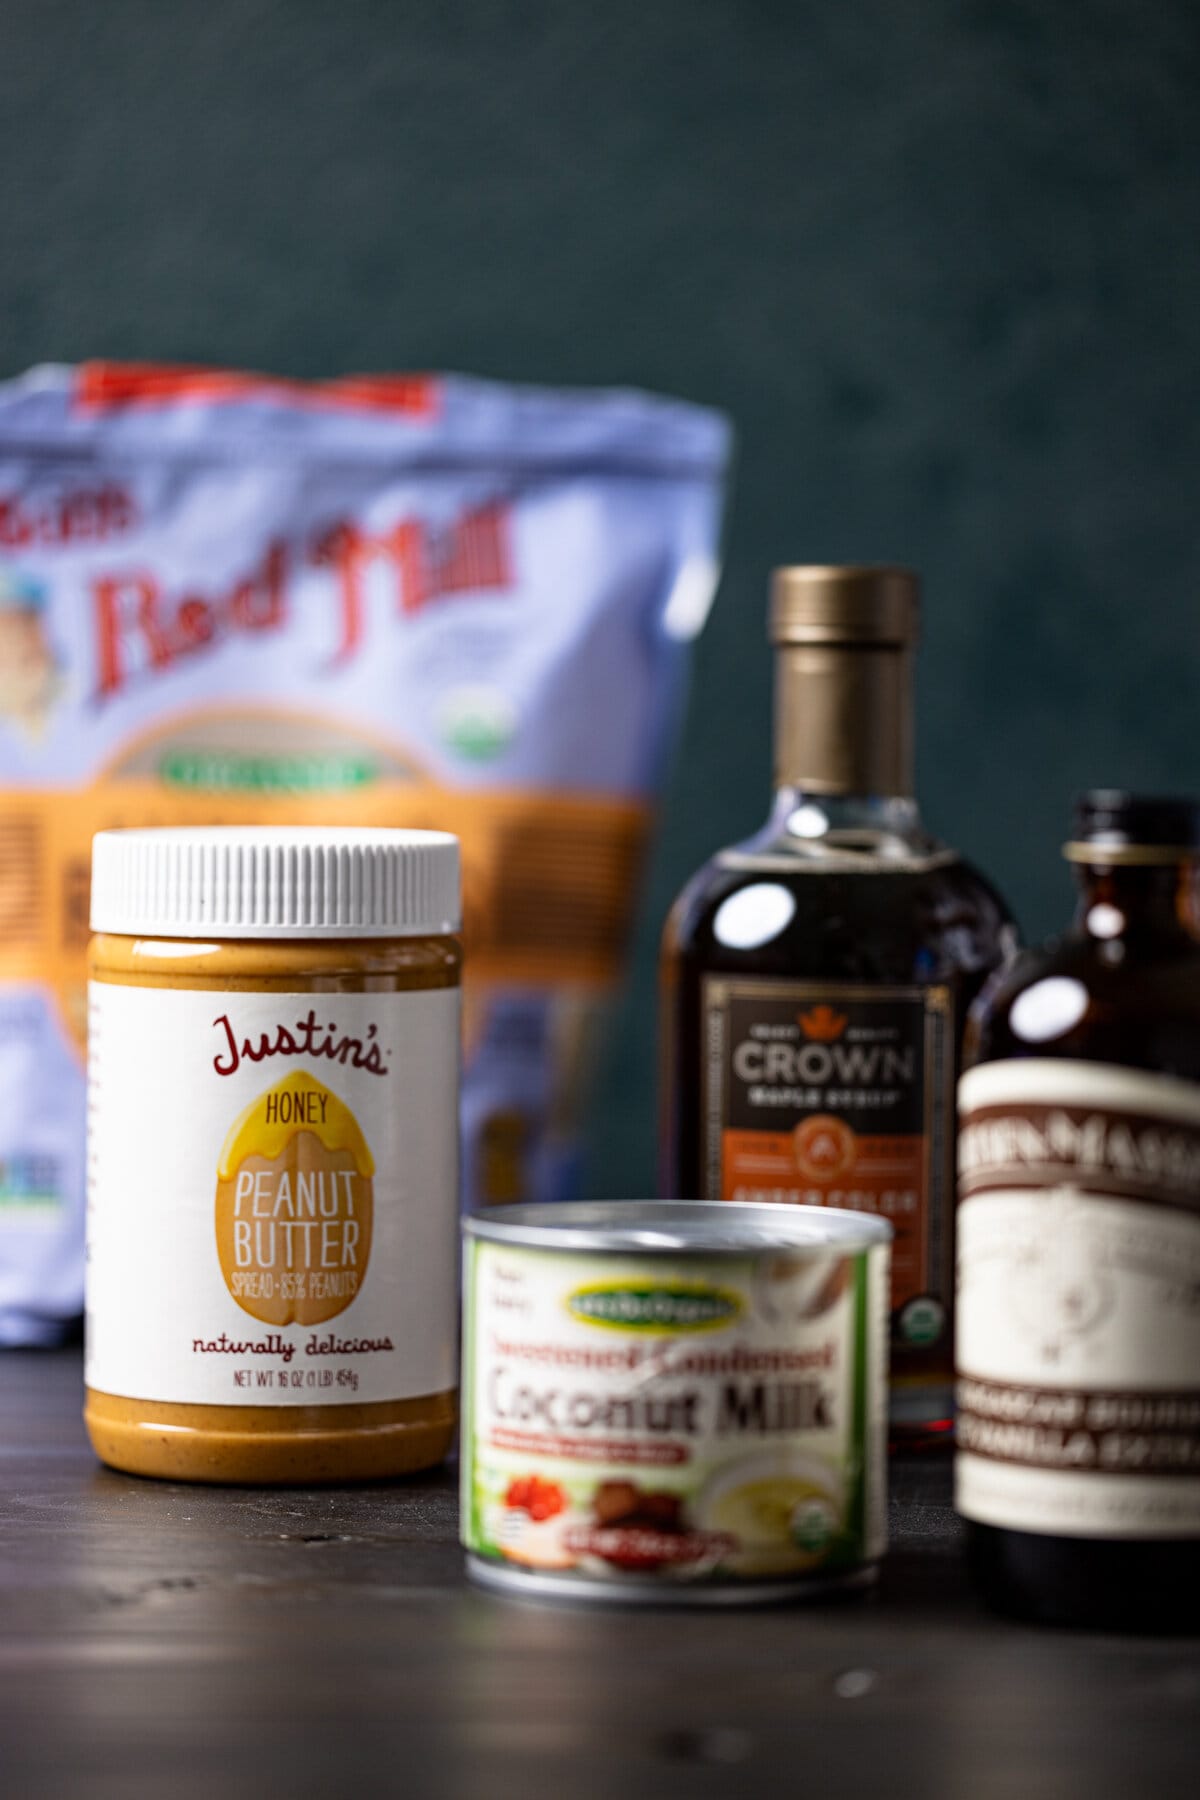 Ingredients for Jamaican Vegan Peanut Punch including honey peanut butter, coconut milk, and vanilla extract